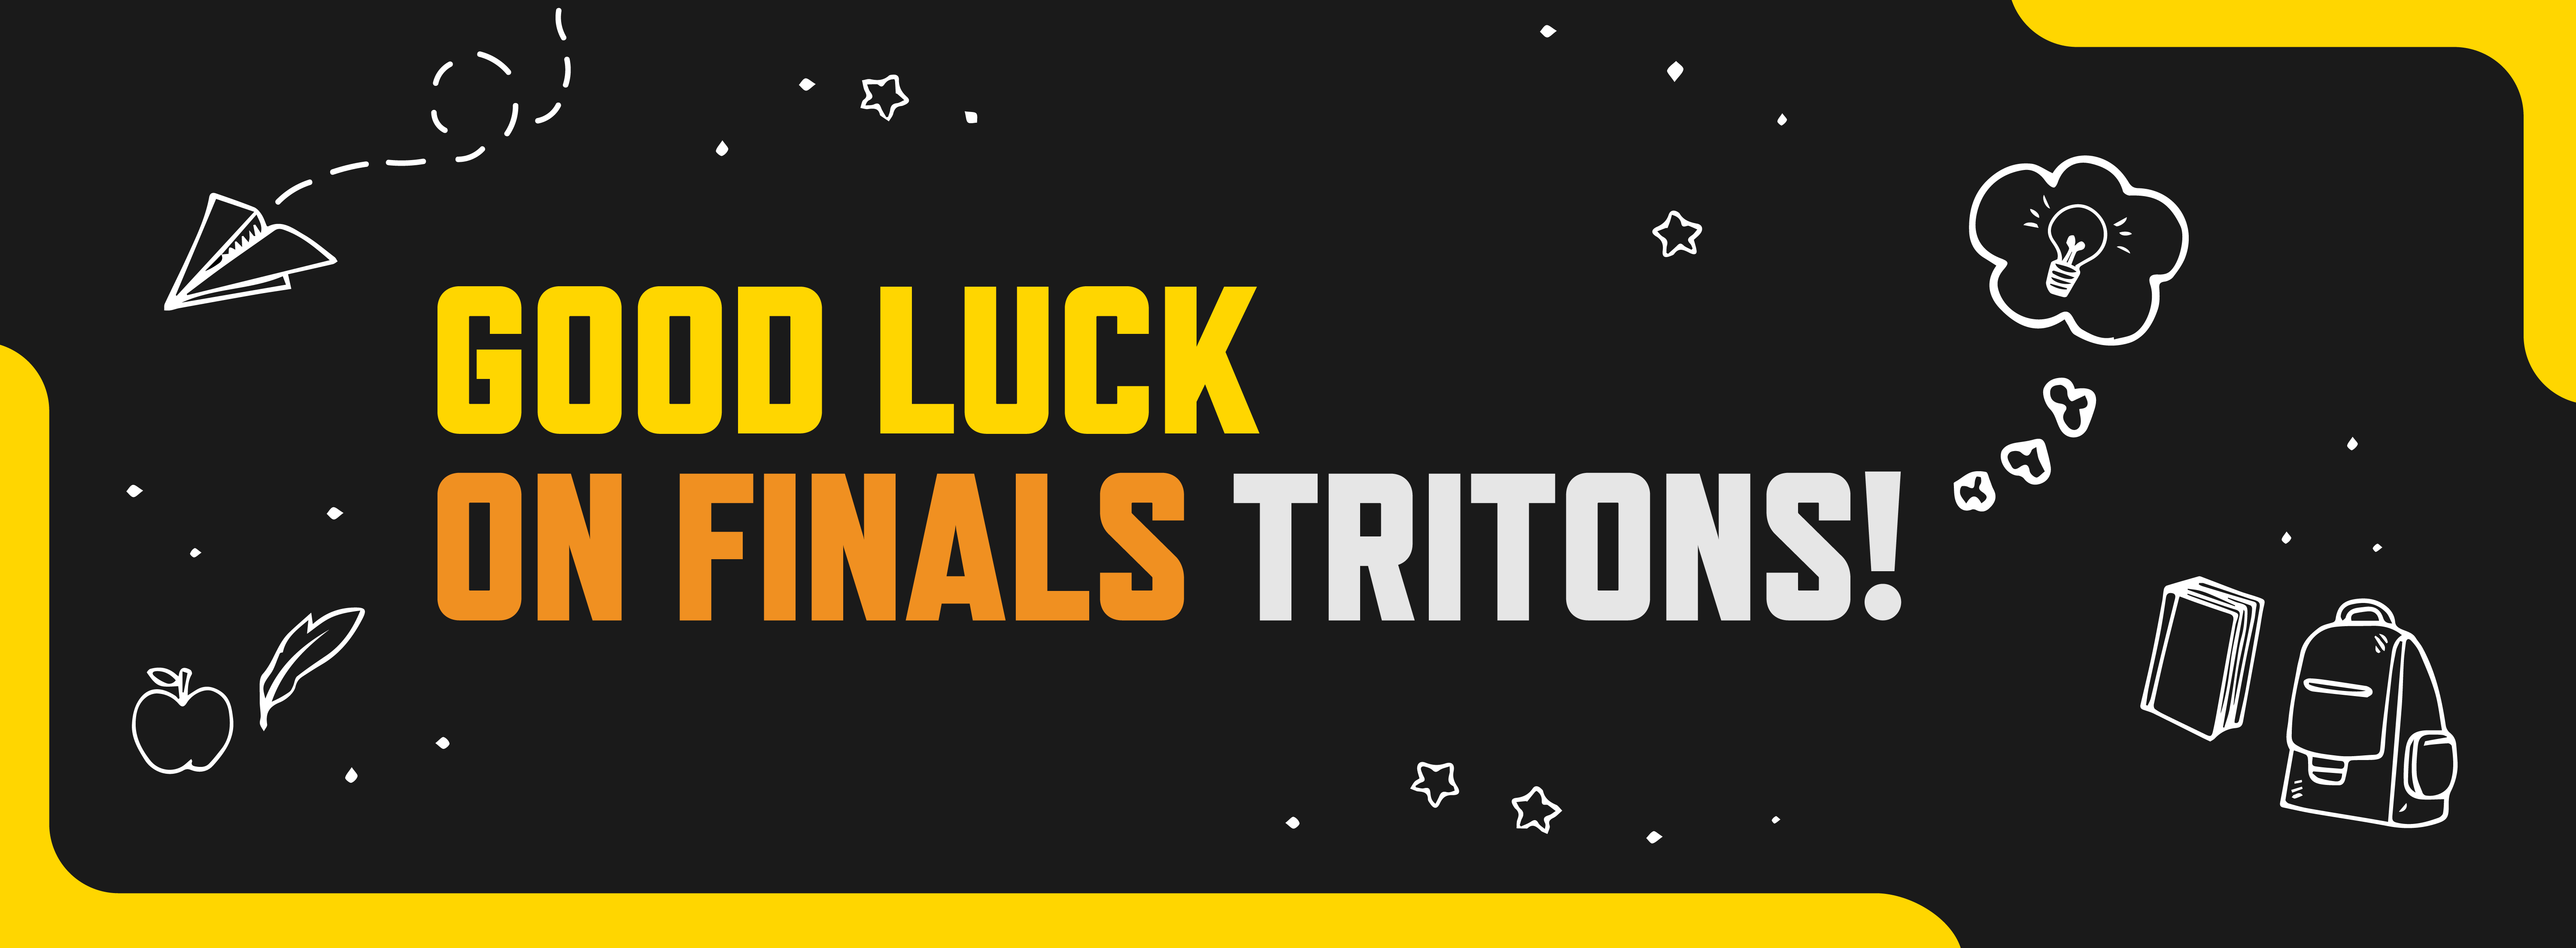 Good luck on finals tritons 